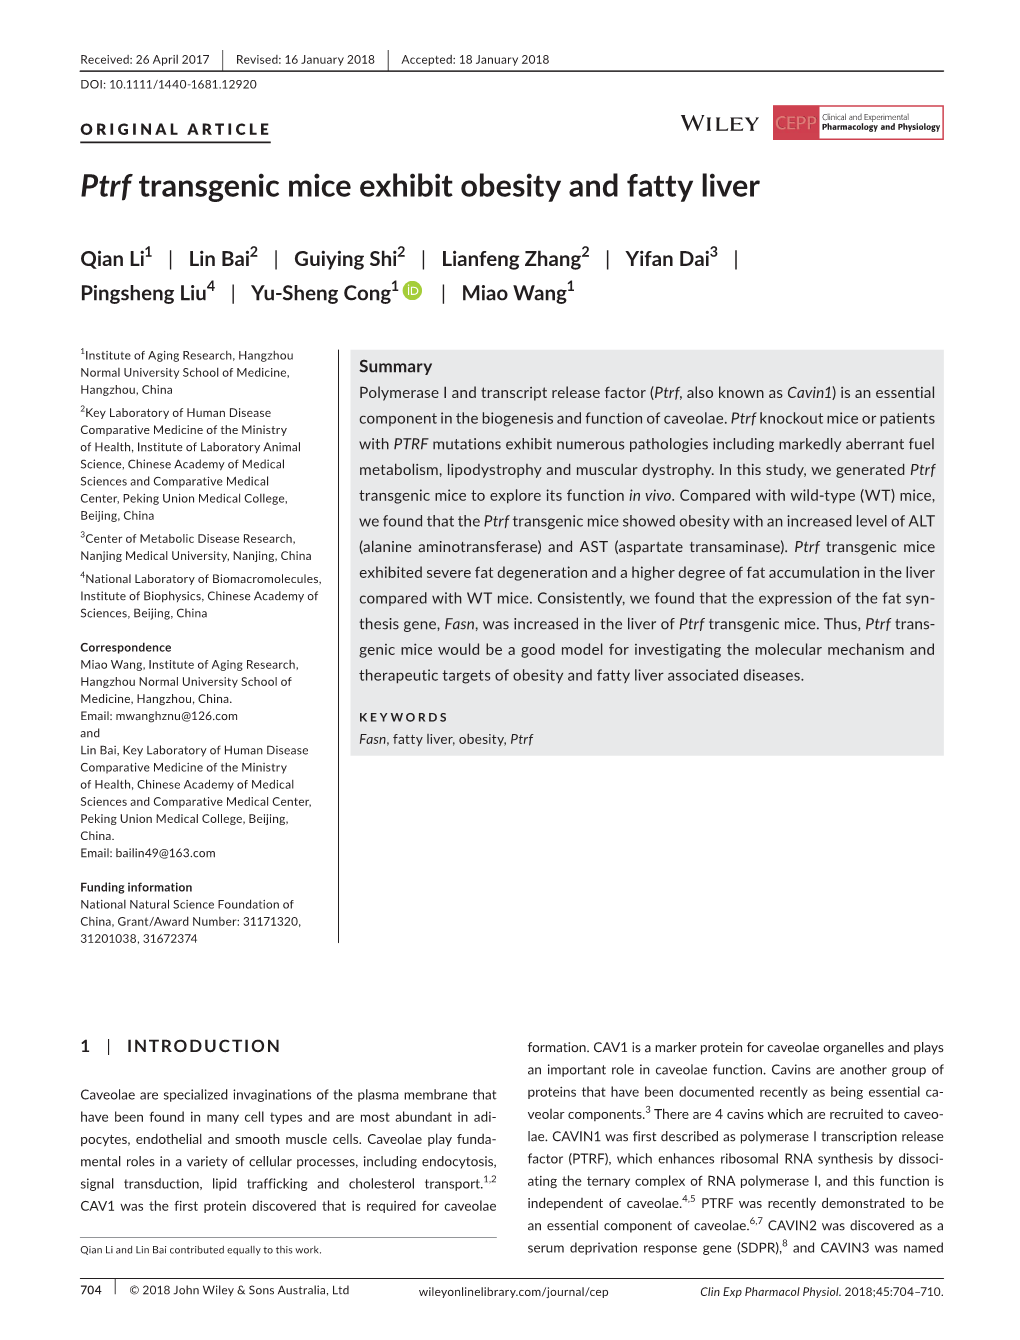 Ptrf Transgenic Mice Exhibit Obesity and Fatty Liver